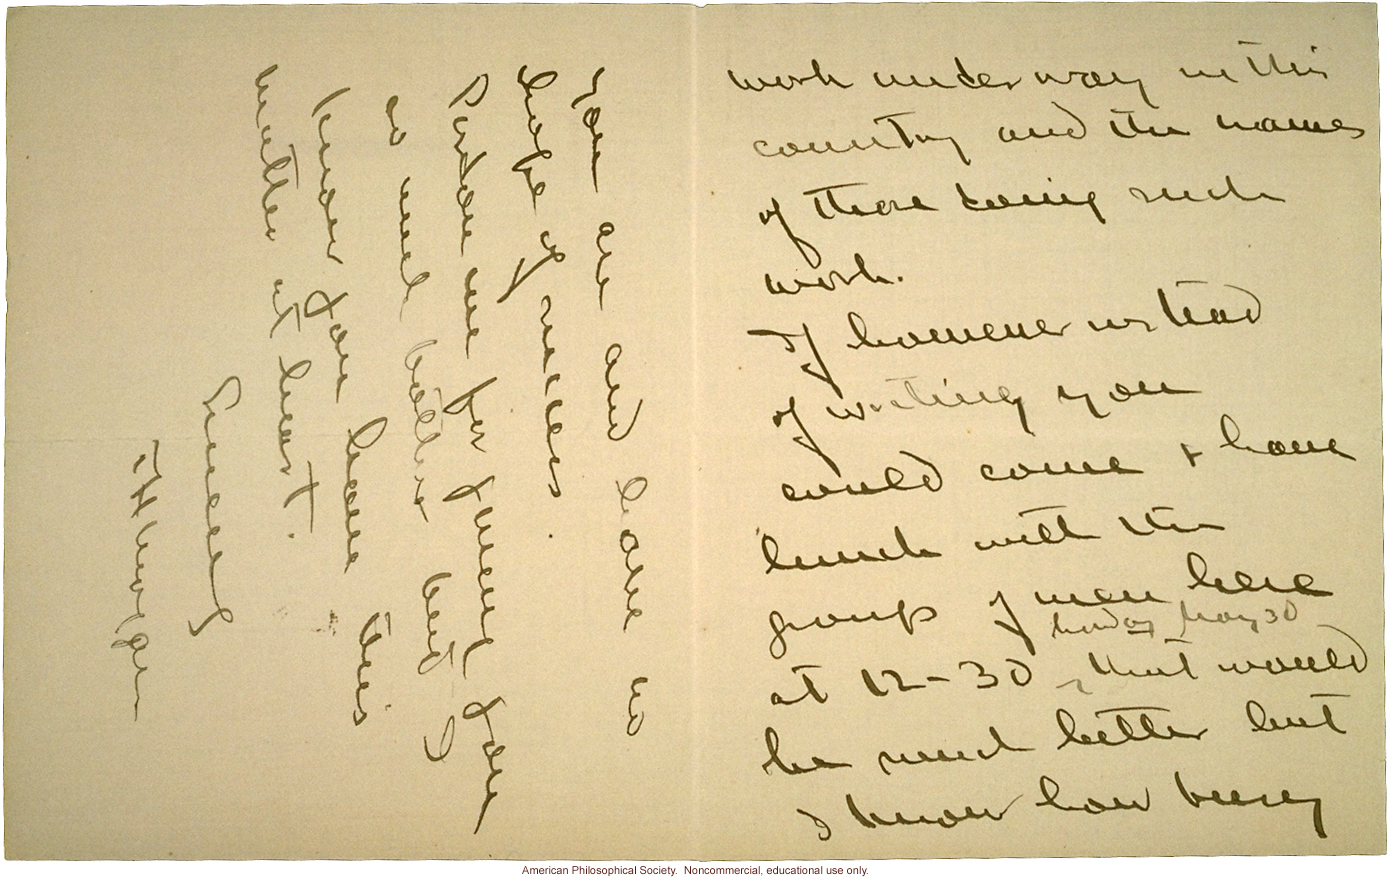 T.H. Morgan letter to Charles Davenport requesting eugenics information